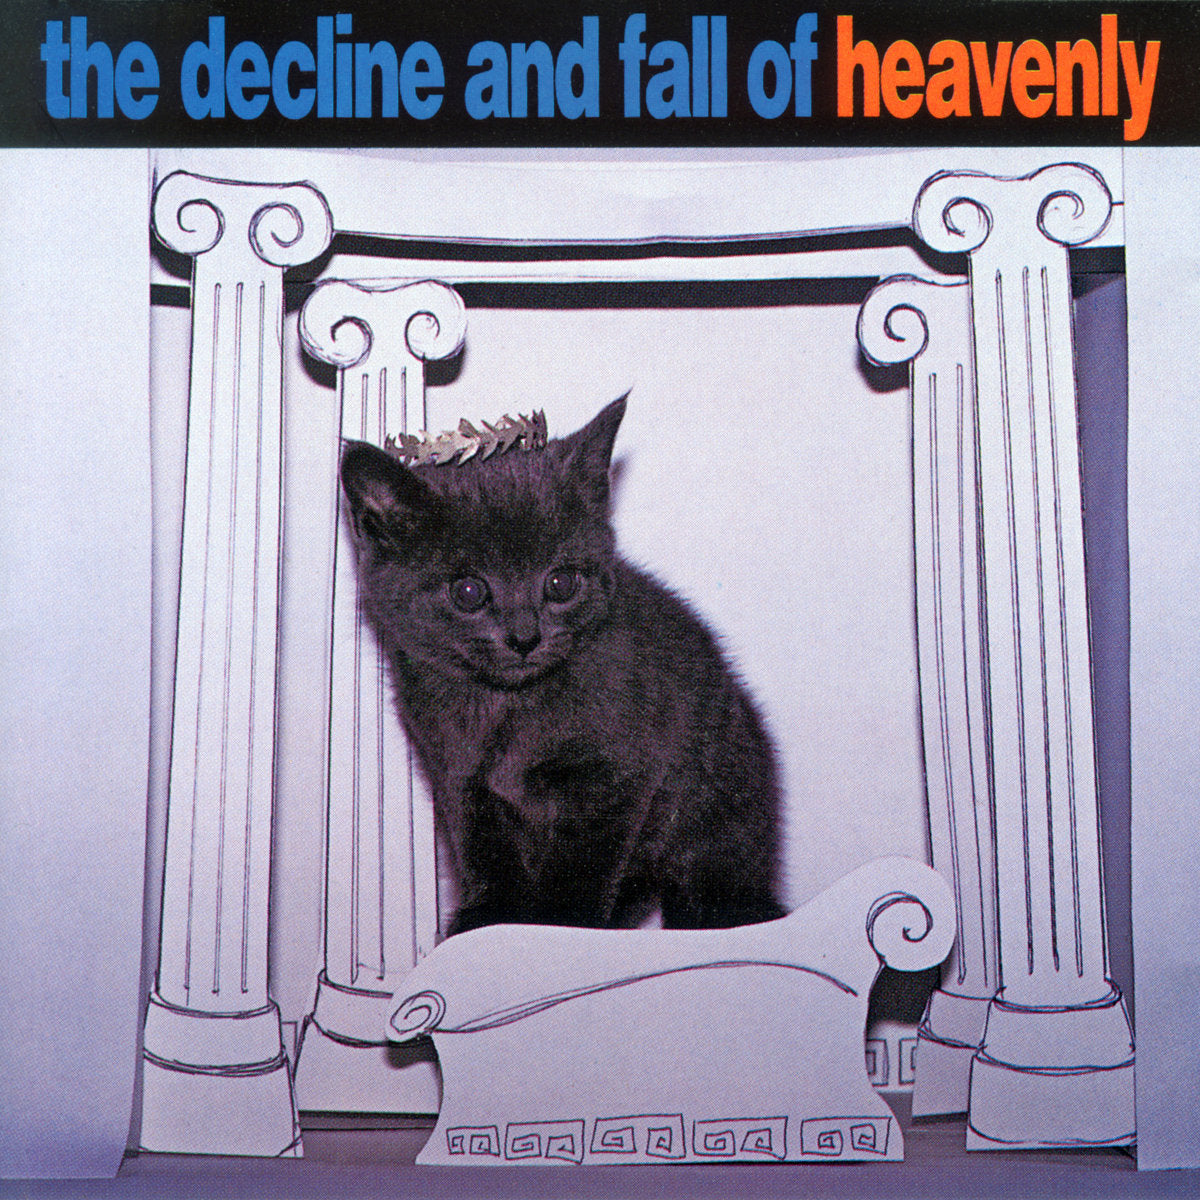 HEAVENLY - THE DECLINE AND FALL OF HEAVENLY Vinyl LP